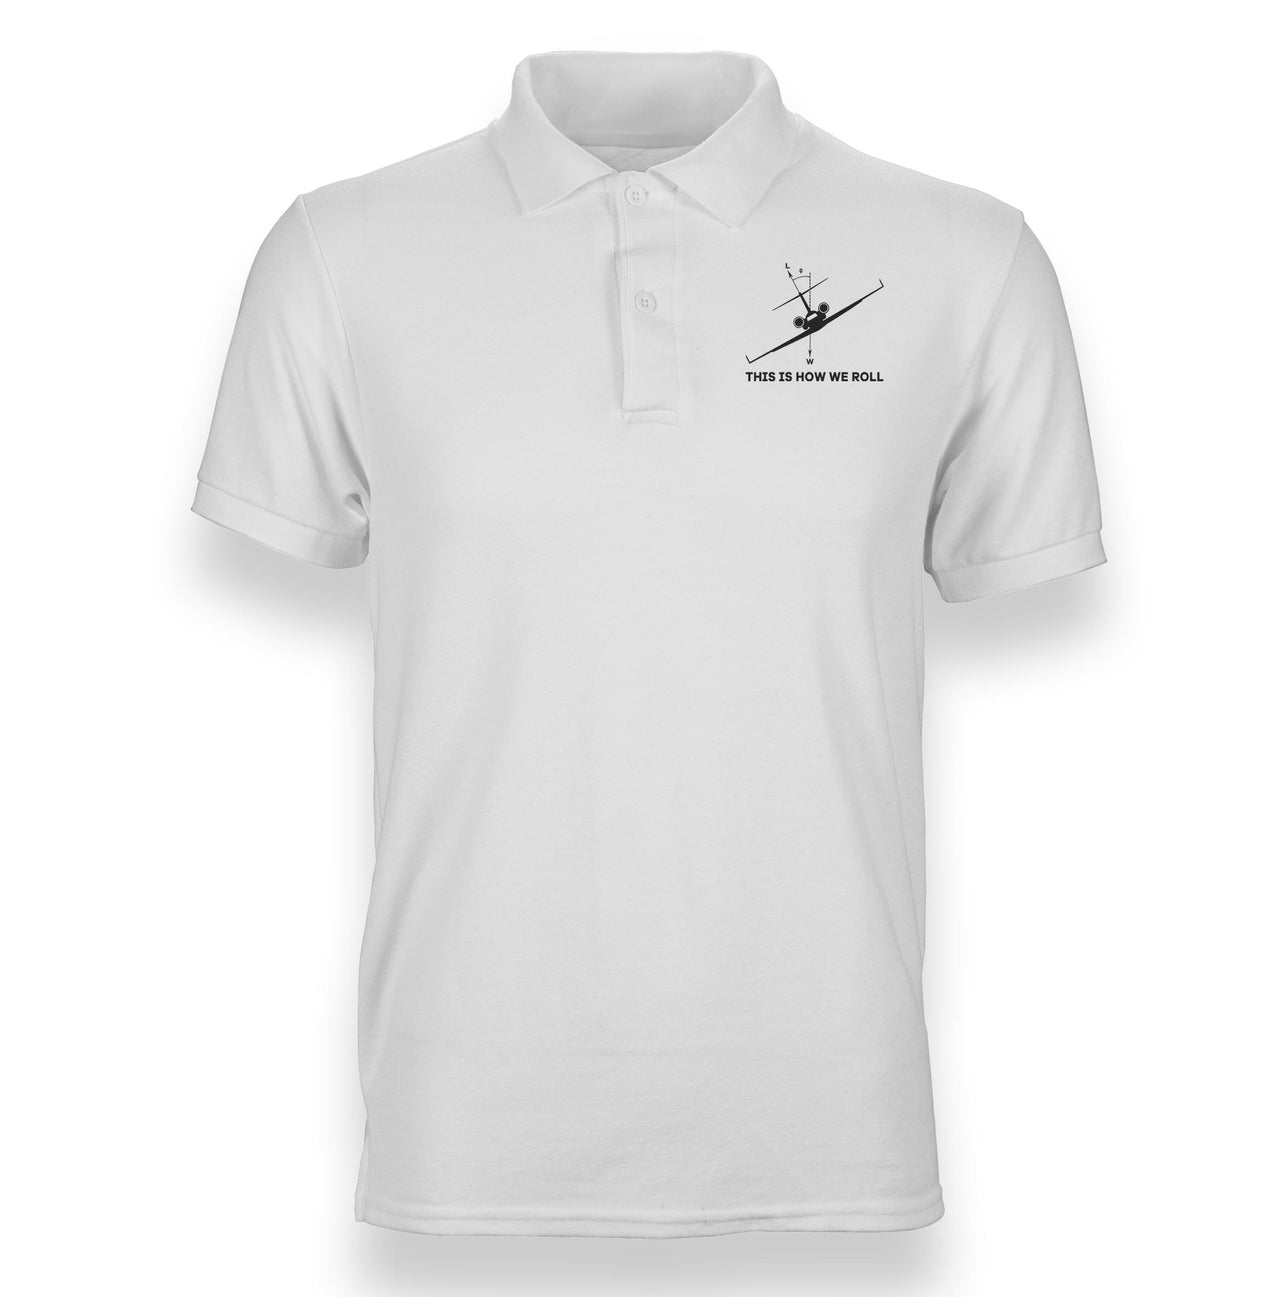 This is How We Roll Designed Polo T-Shirts